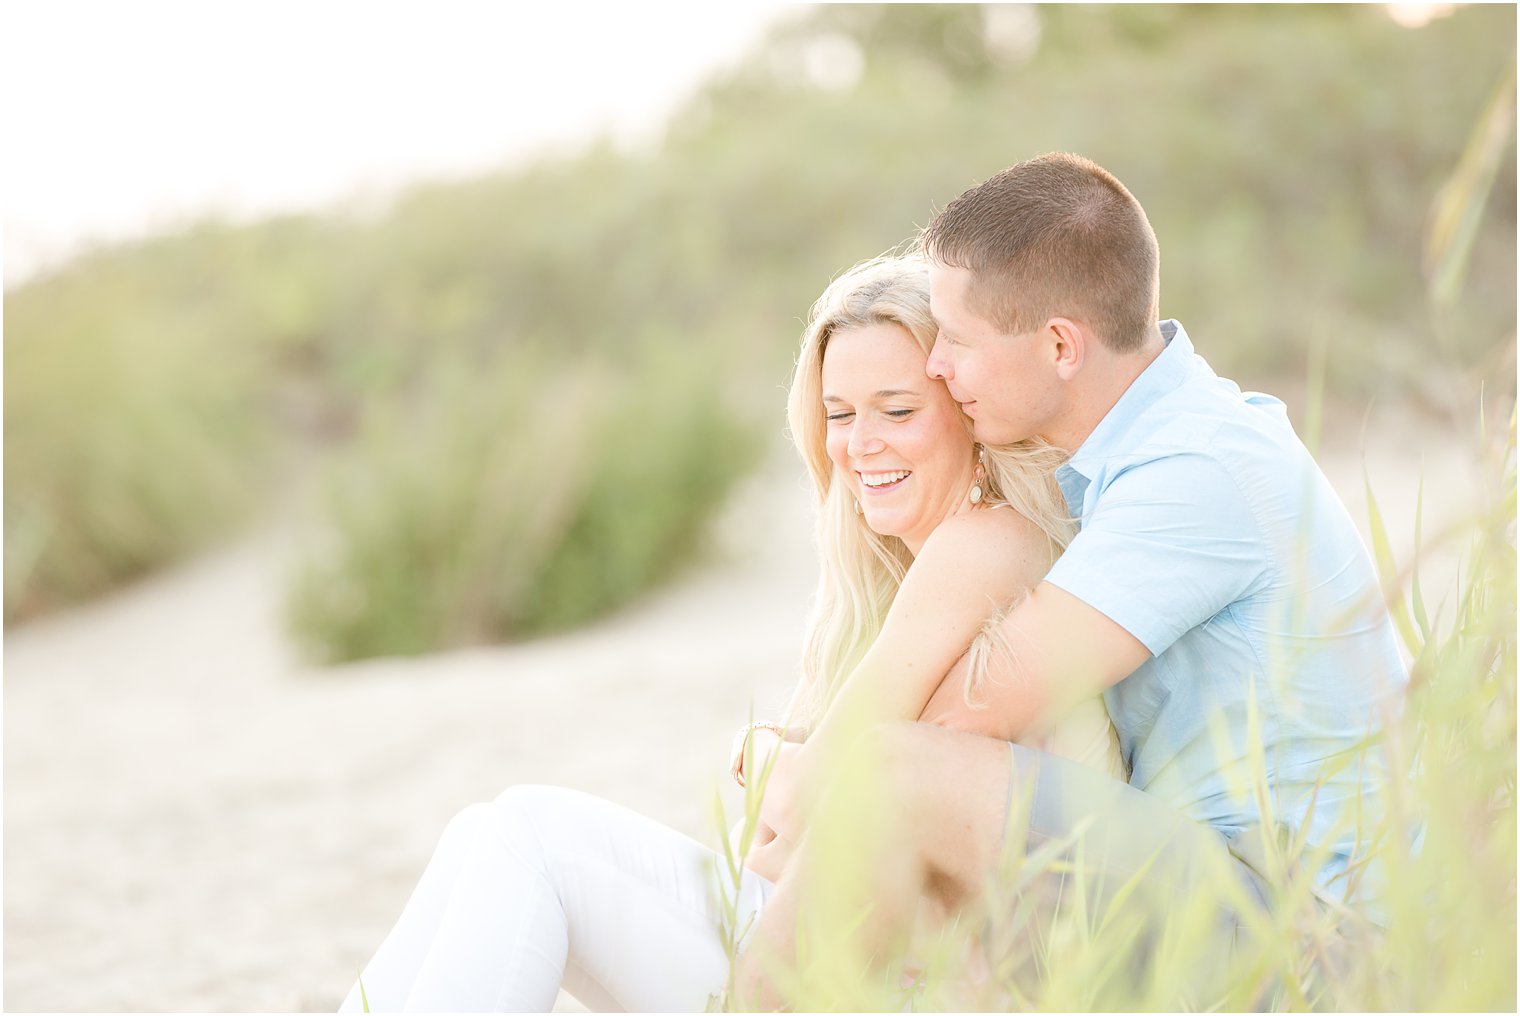 Best engagement photo locations in NJ